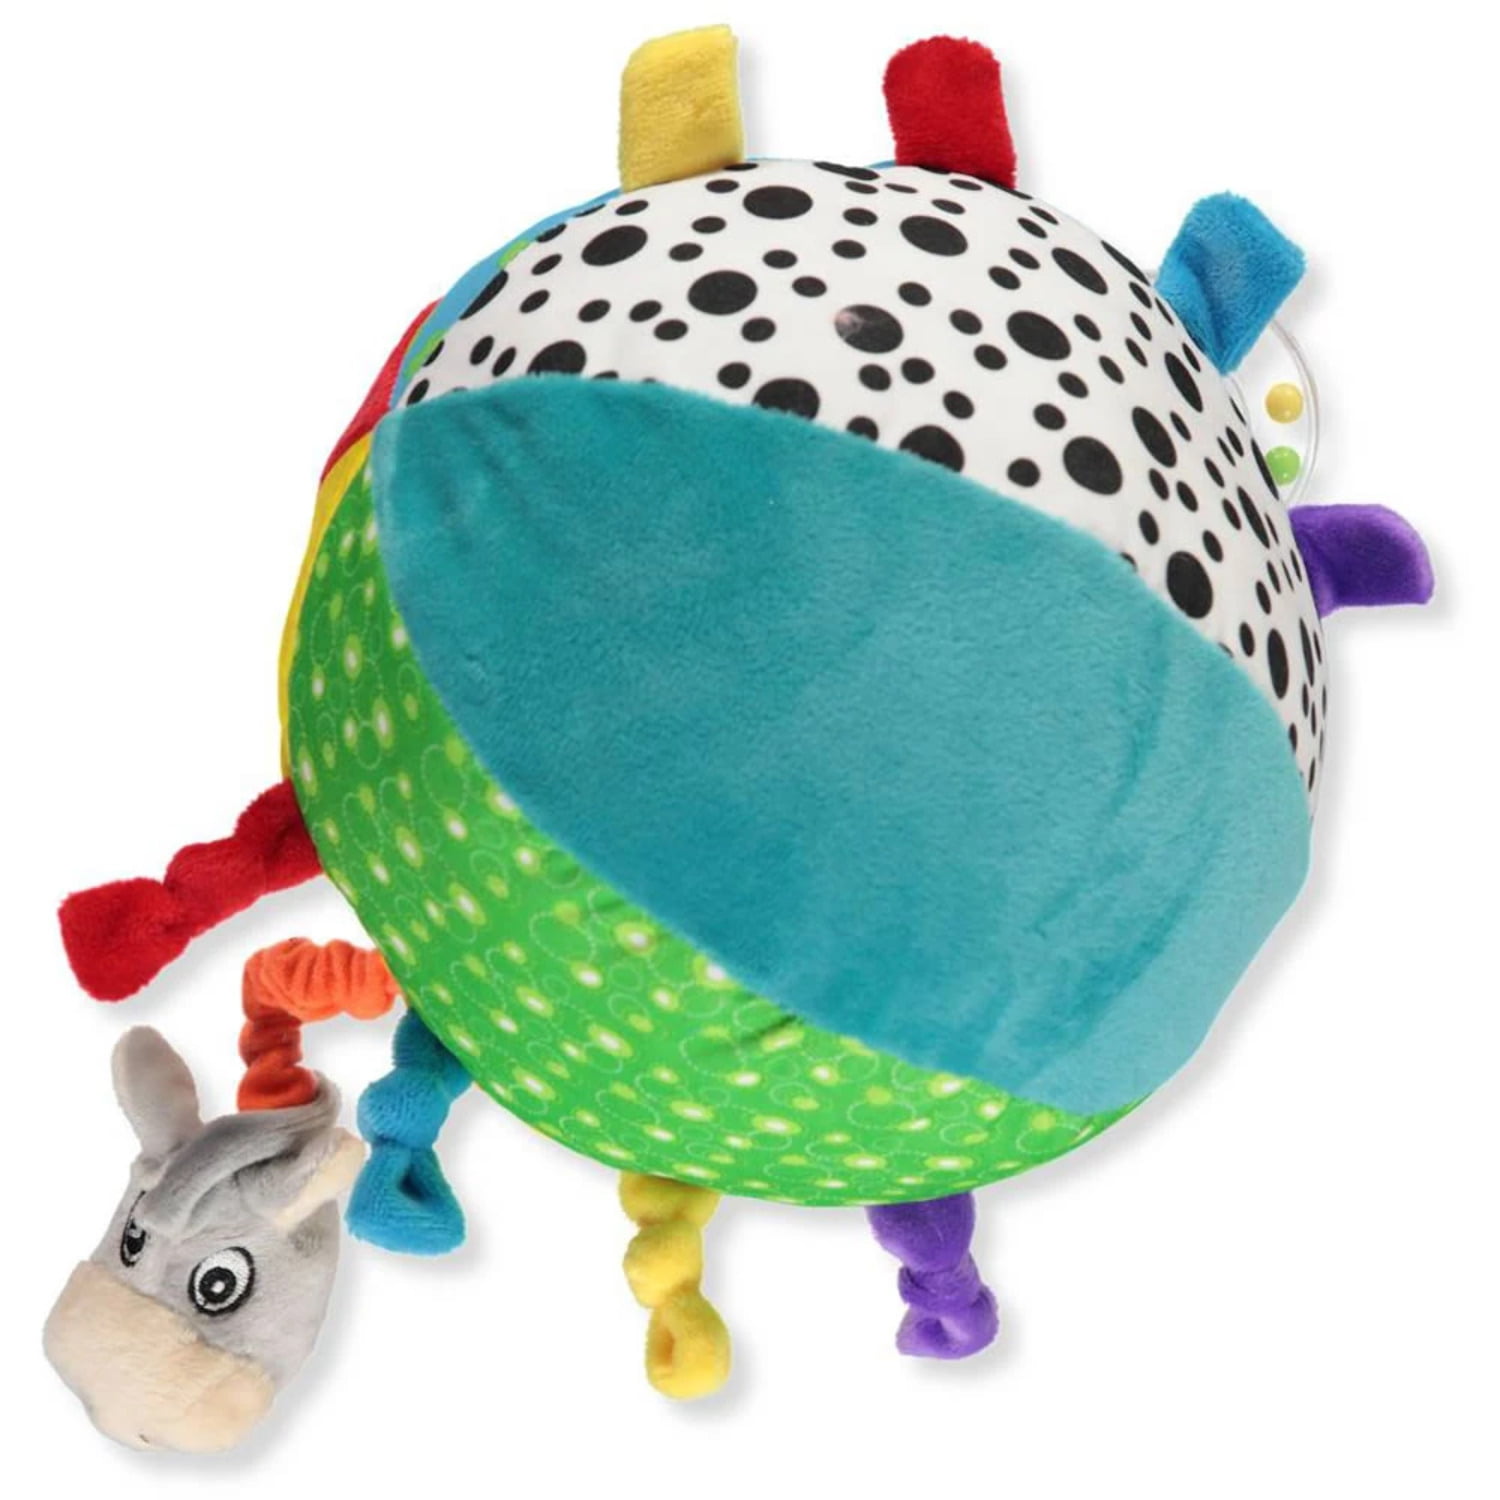 Helps To Develop 3M Ñuby Squeak Rattle N Roll Soft Activity Toy Colourful 